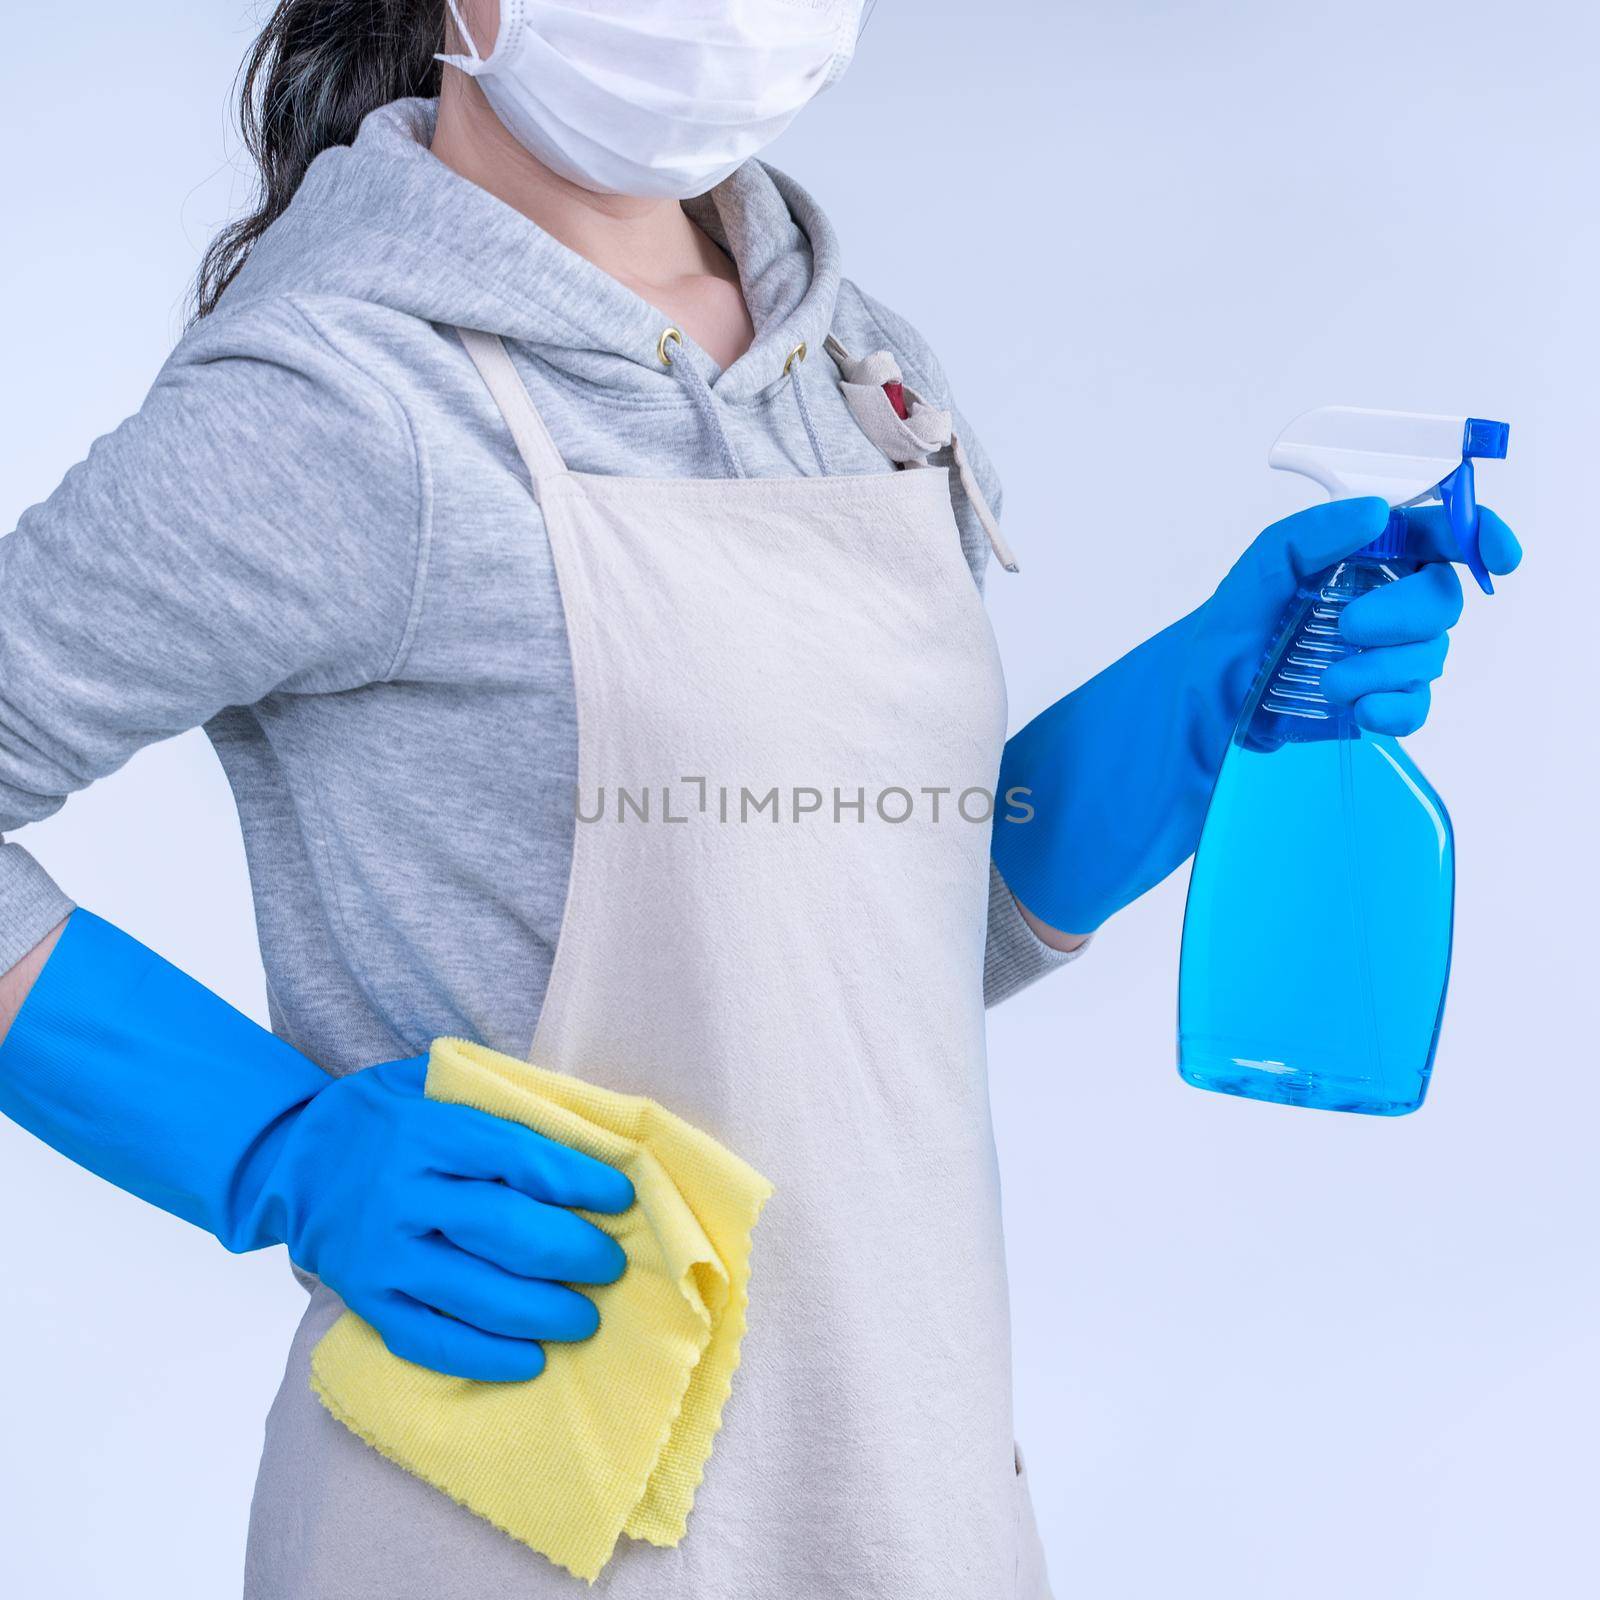 Young woman housekeeper in apron is doing cleaning with blue gloves, wet yellow rag, spraying bottle cleaner, close up, copy space, blank design concept.